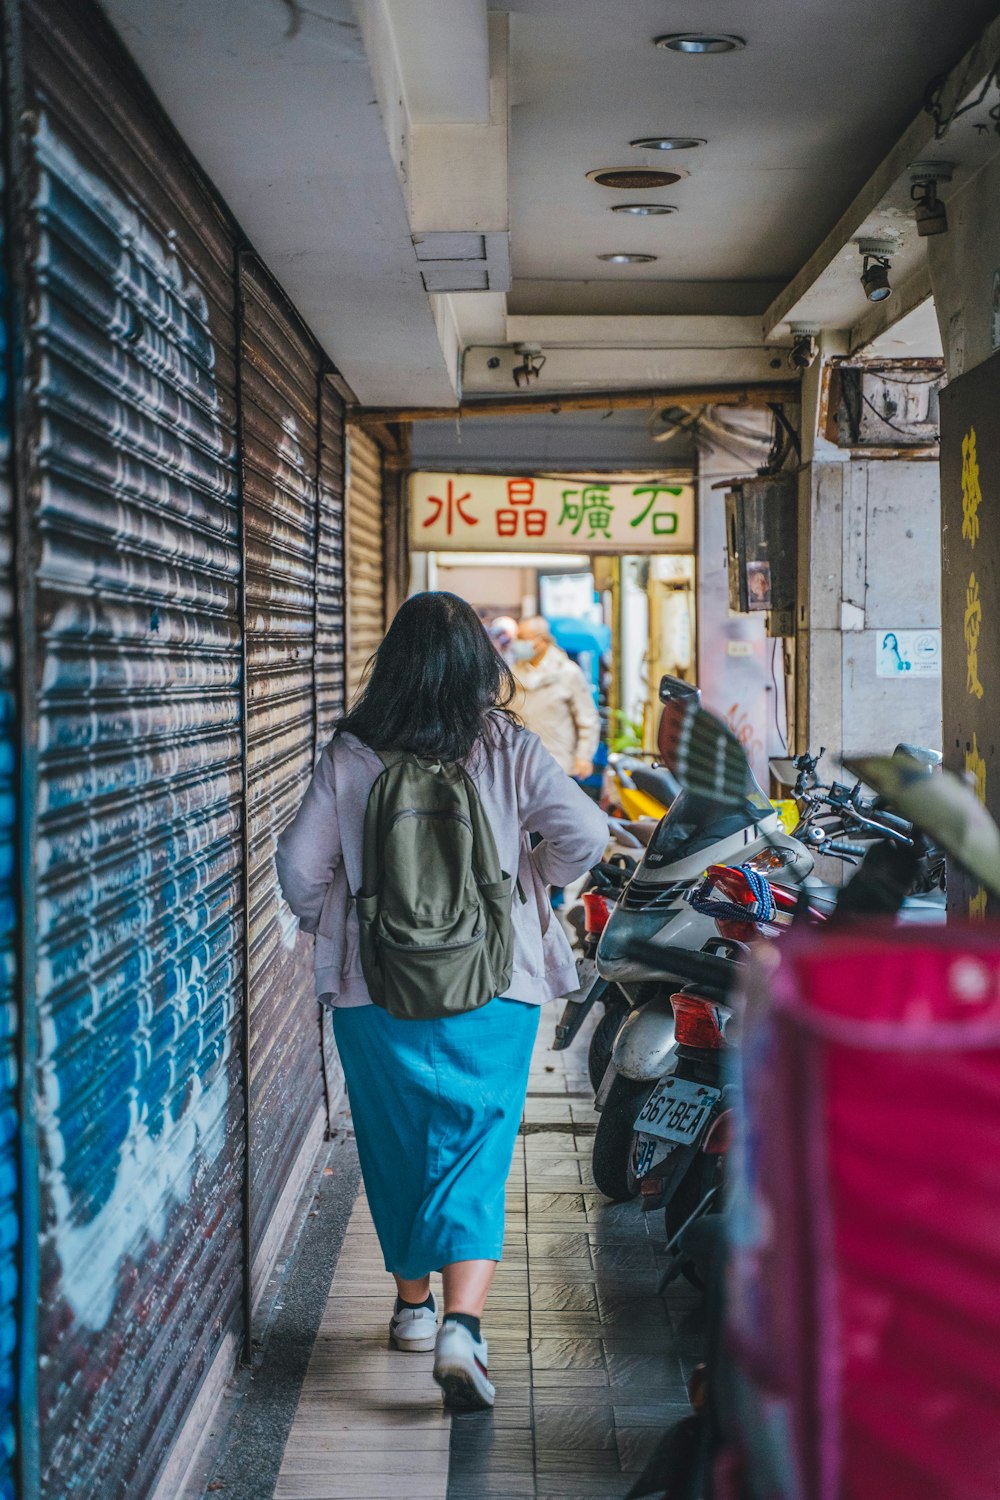 a woman walking down a street next to parked motorcycles